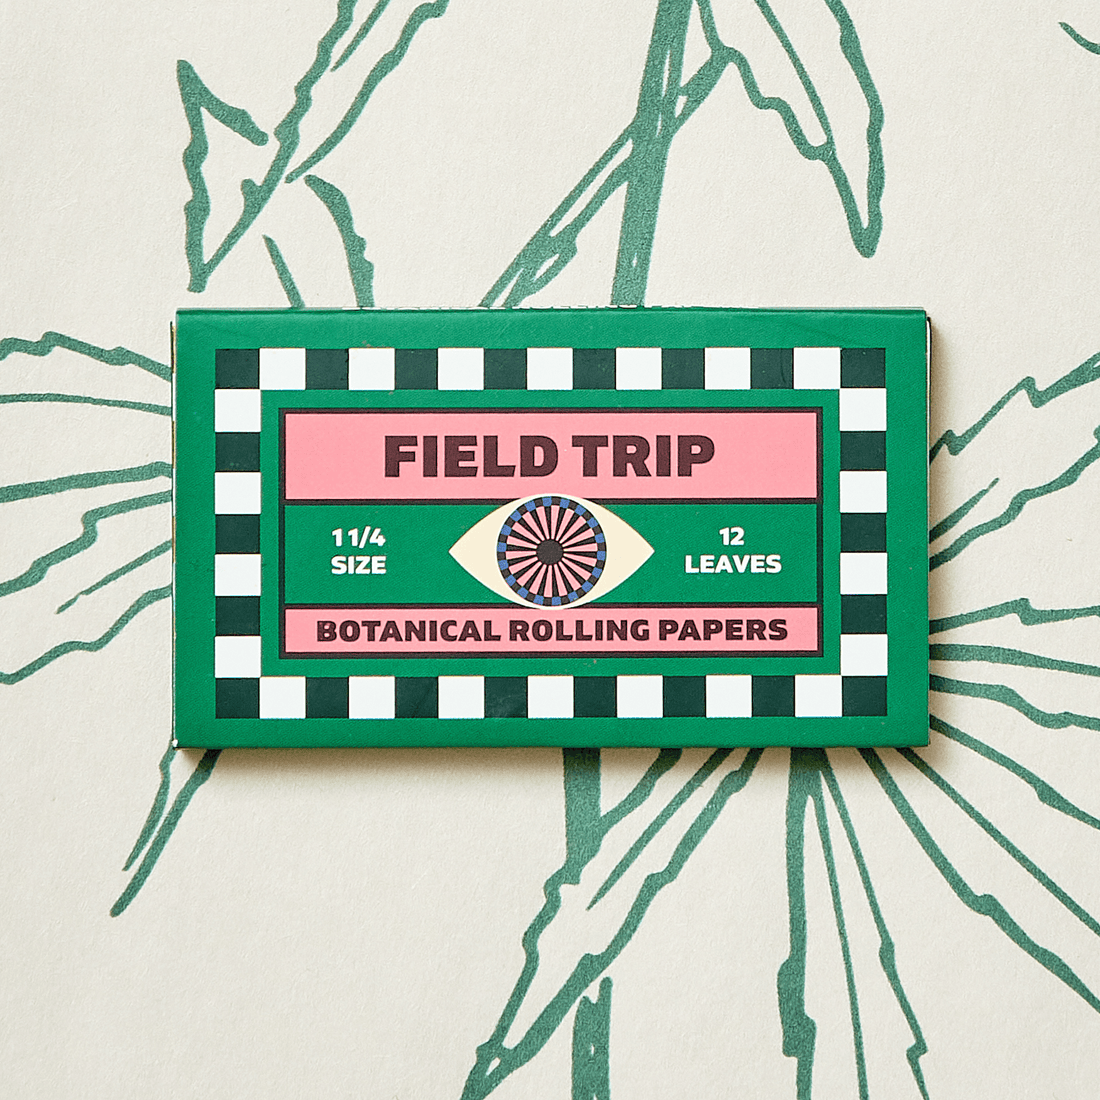 Pack of 12 Botanical Organic Printed Rolling Papers with cannabis sativa plant illustration, made with sustainable materials and organic tips included.